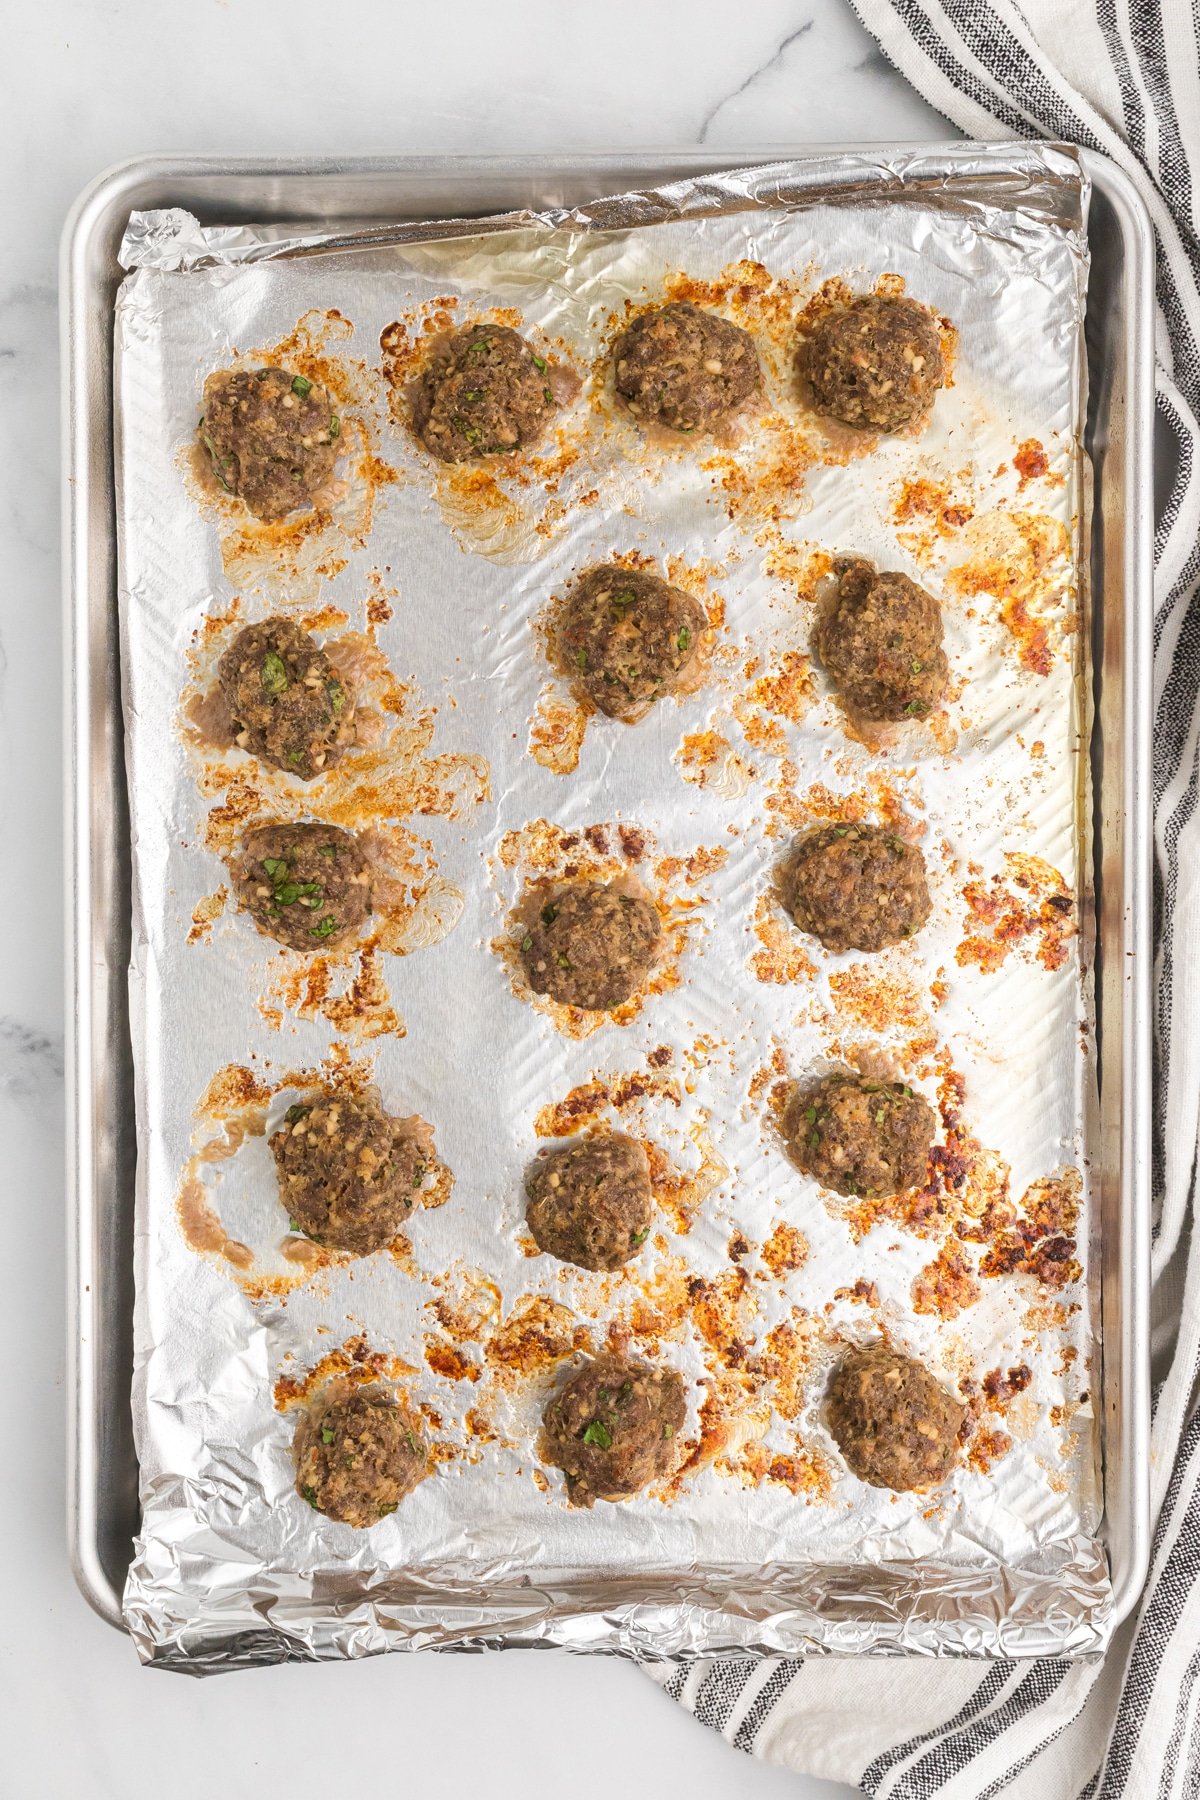 Cooked meatballs on a baking sheet